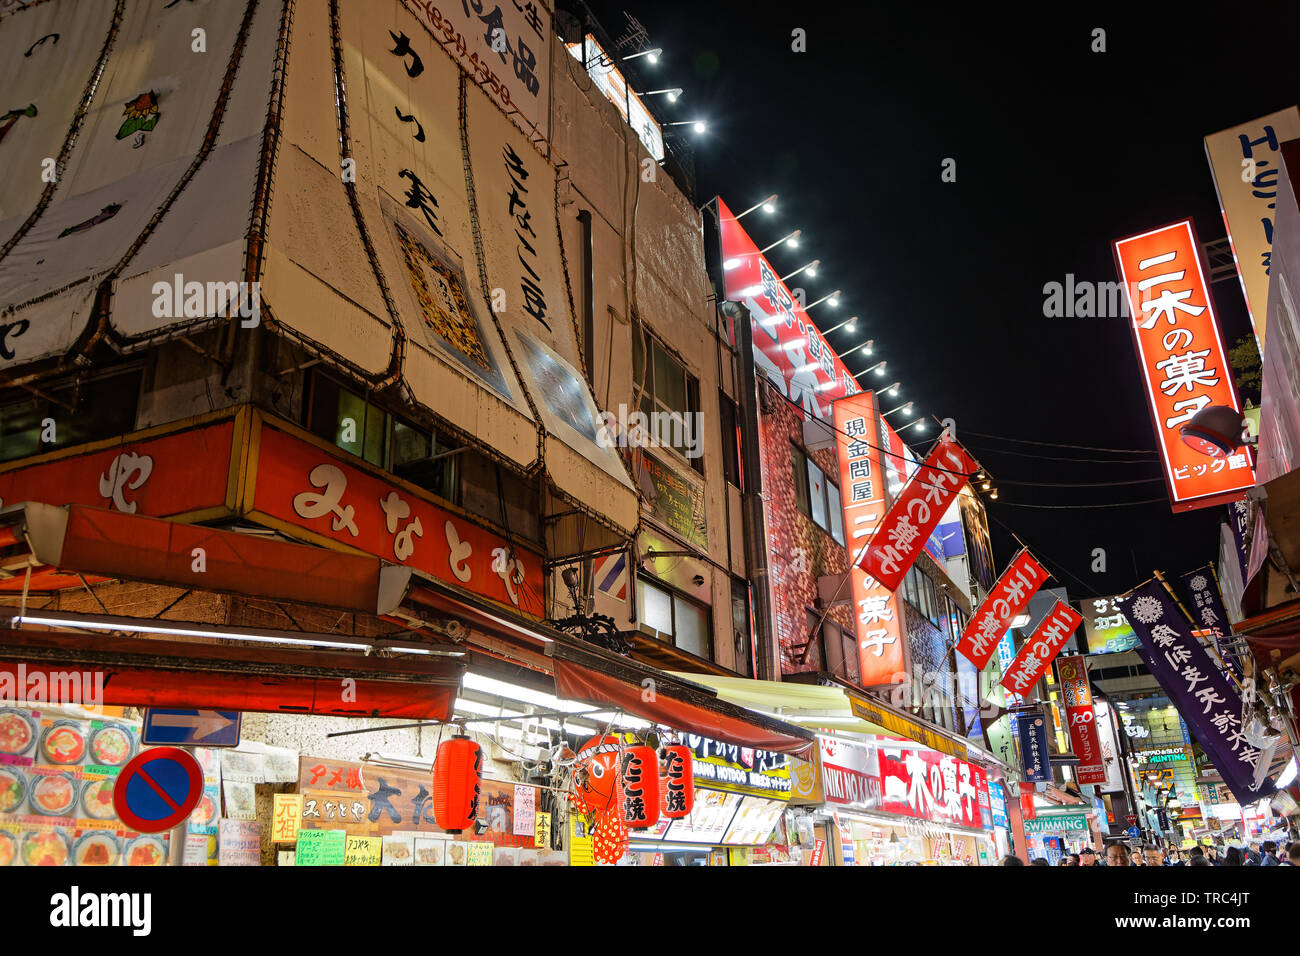 TOKYO, JAPAN, May 16, 2019 : Lights of Ueno district by night. The Greater Tokyo Area is ranked as the most populous metropolitan area in the world. Stock Photo